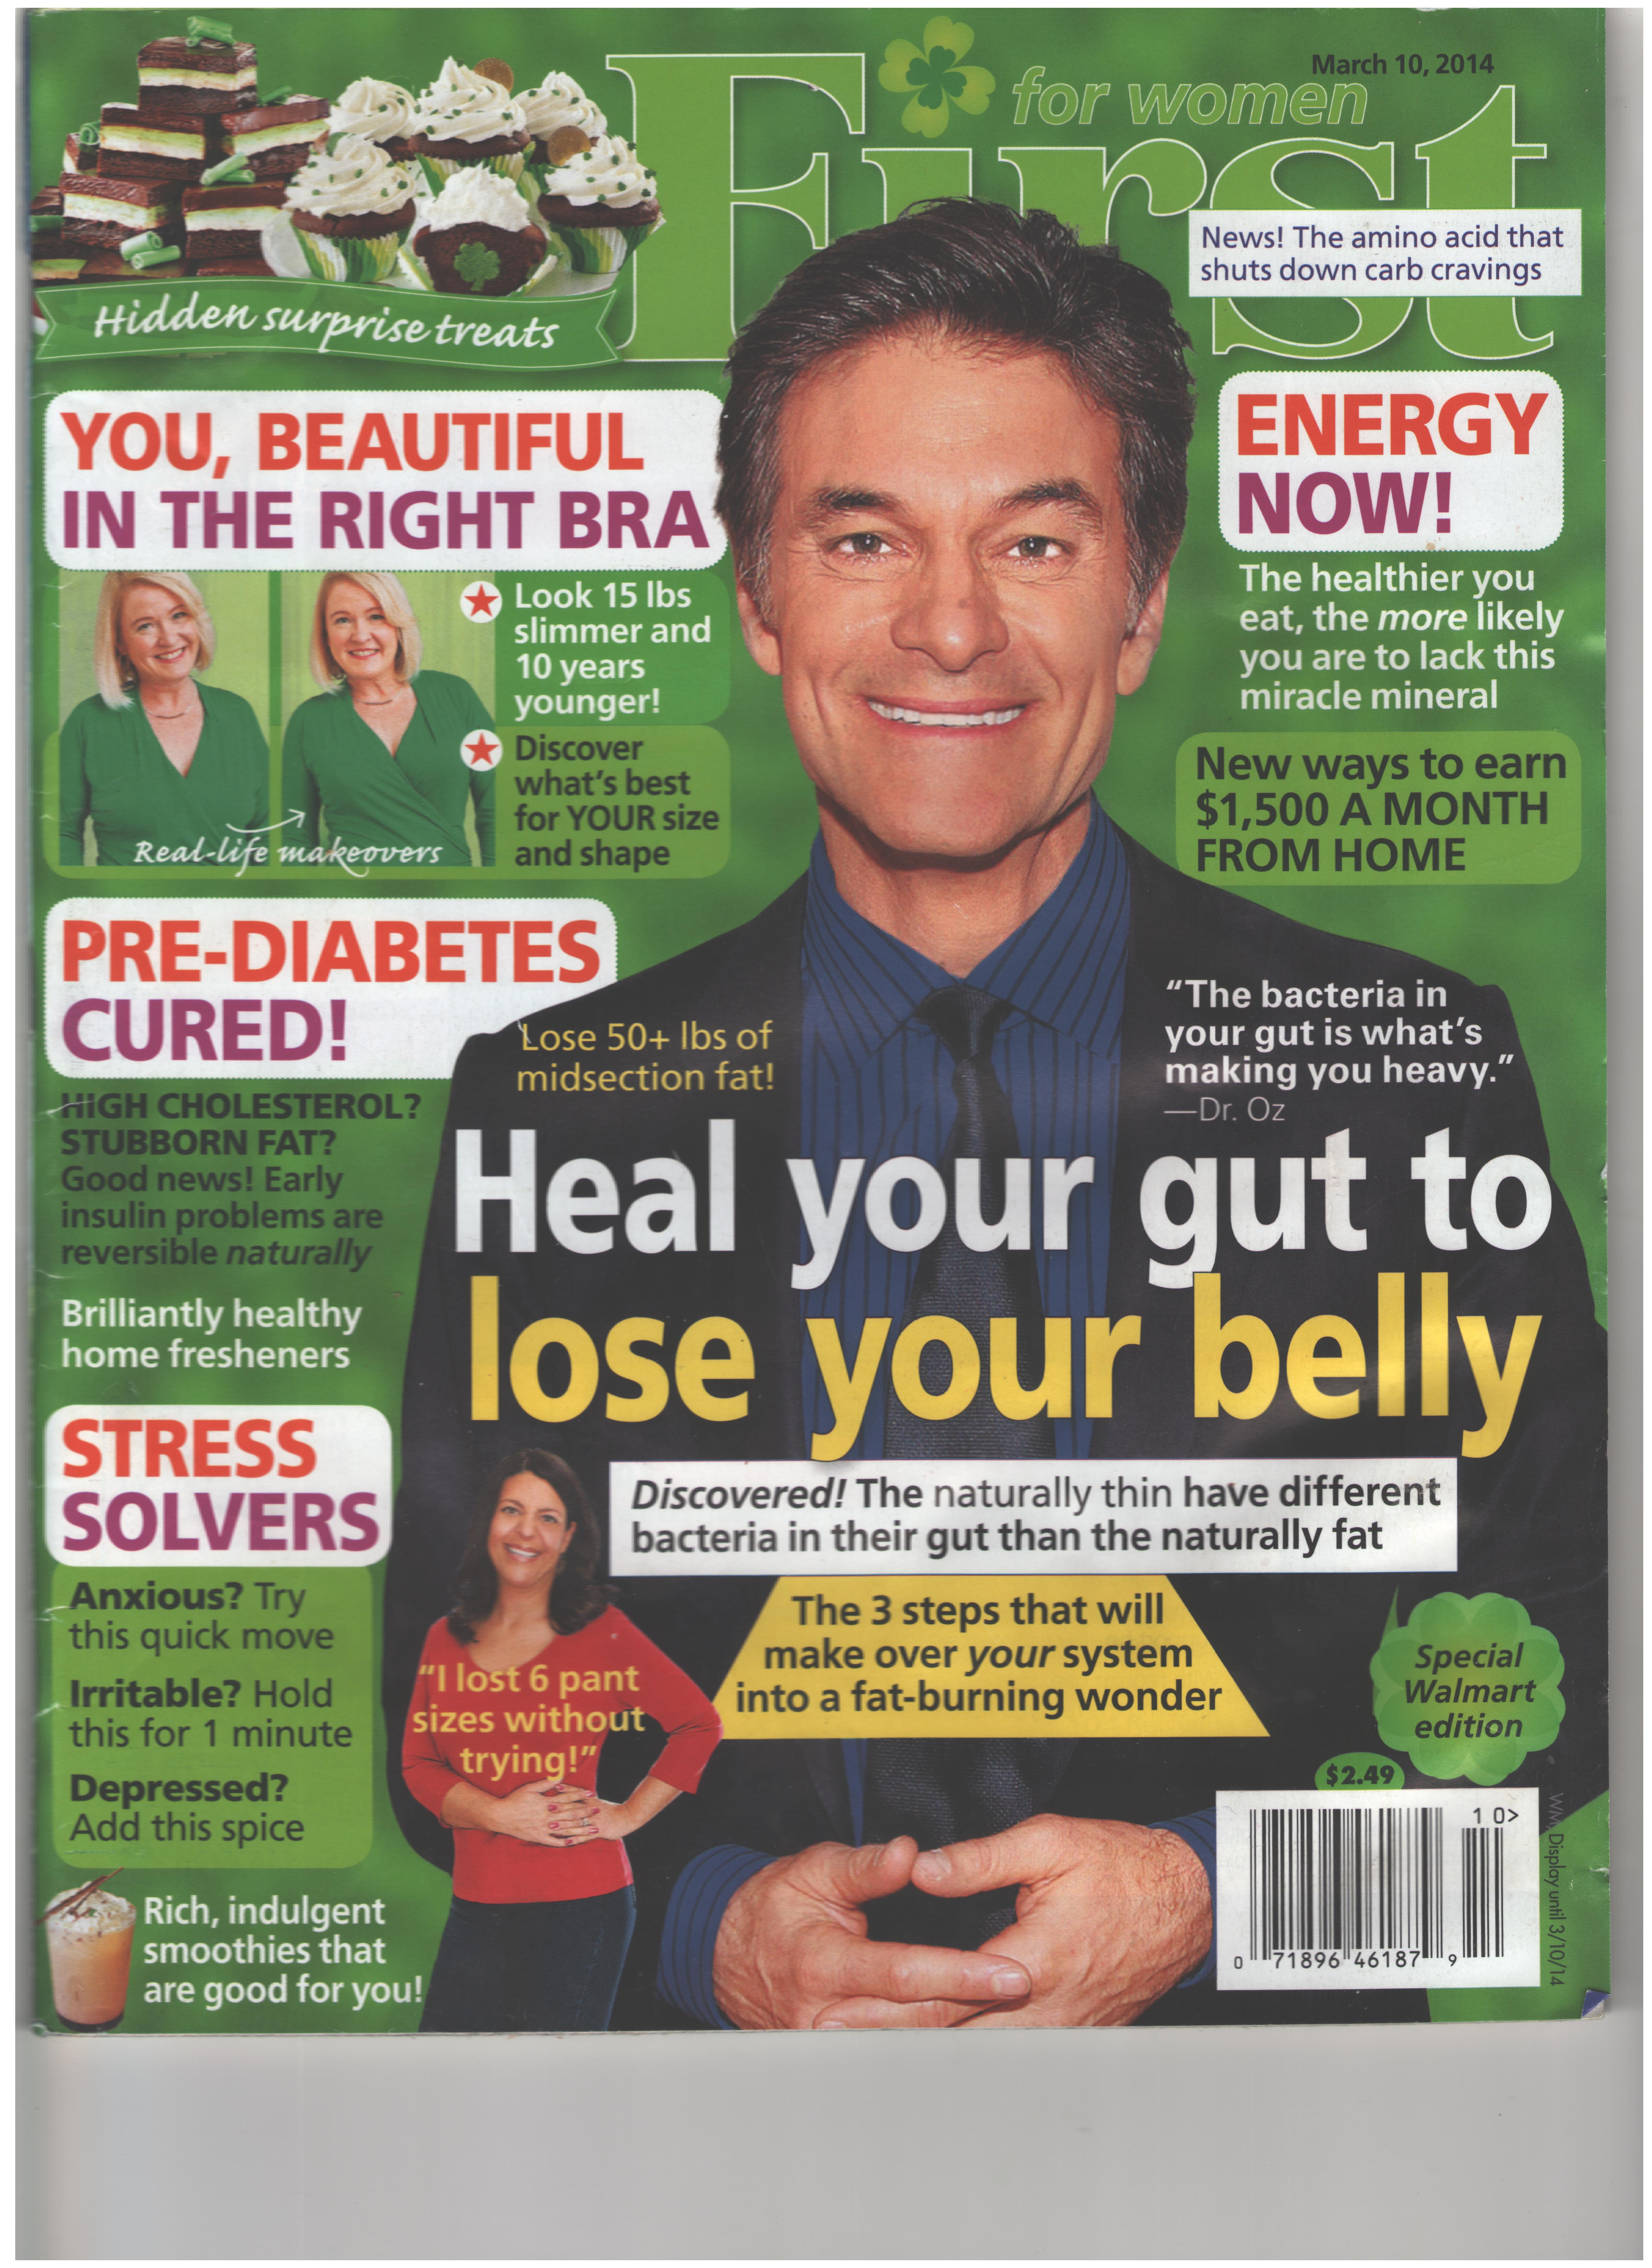 Dr Oz - Heal Your Gut with Probioitics